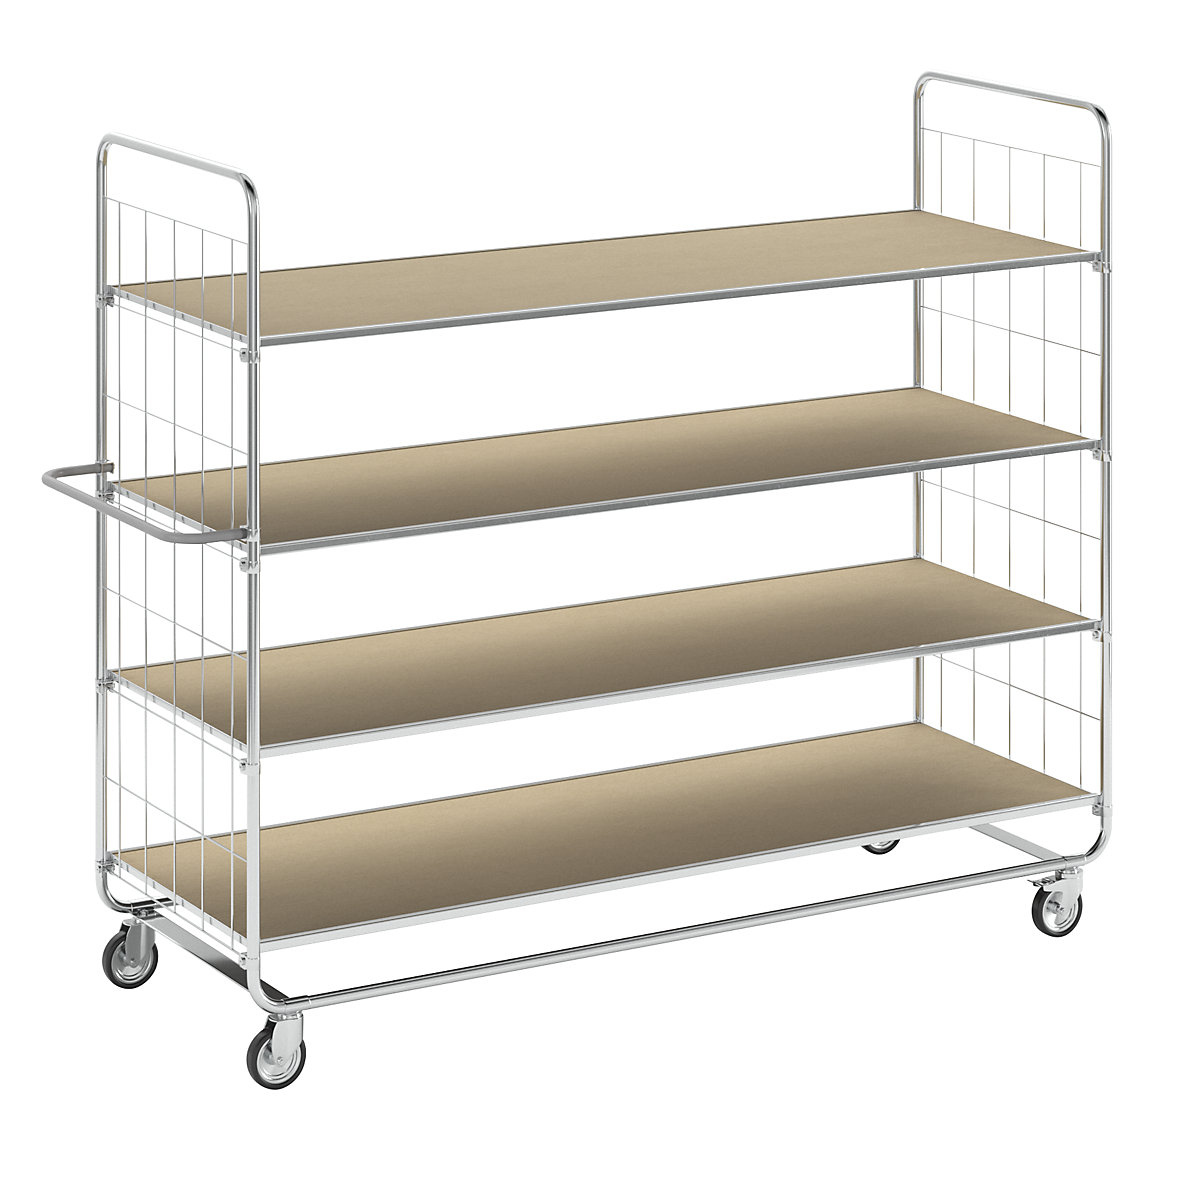 ESD shelf truck, with 4 shelves – Kongamek, 4 castors, 2 with stops, LxWxH 1395 x 470 x 1120 mm, 2+ items-8